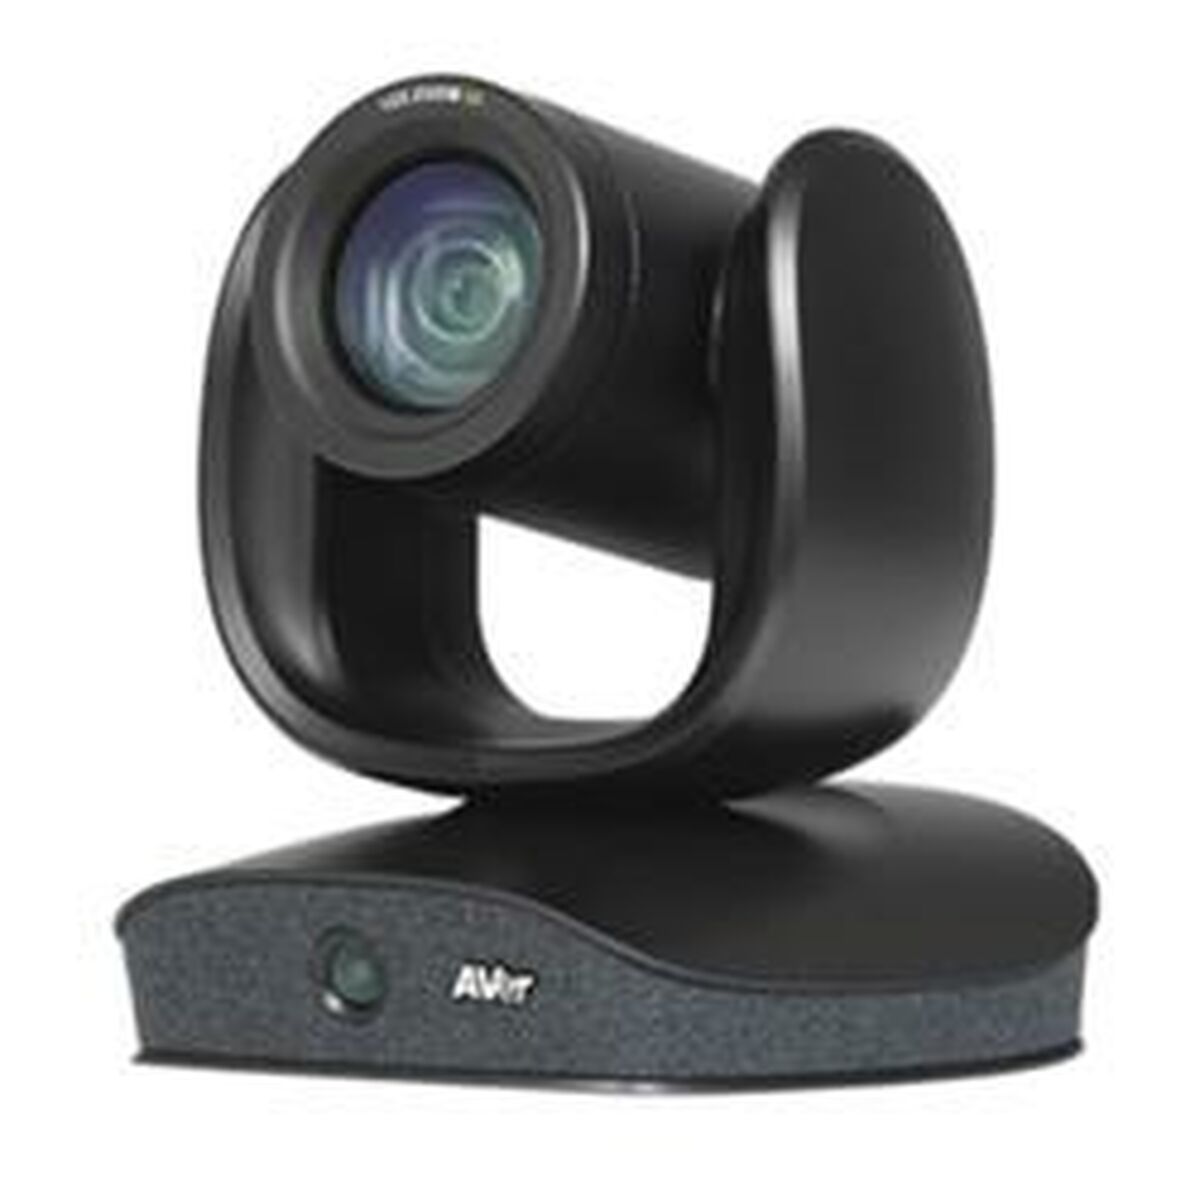 Webcam AVer CAM570 4K Ultra HD, AVer, Computing, Accessories, webcam-aver-cam570-4k-ultra-hd, :Ultra HD, :Video Conferencing, :Webcam, Brand_AVer, category-reference-2609, category-reference-2642, category-reference-2844, category-reference-t-19685, category-reference-t-19908, category-reference-t-21340, category-reference-t-25568, computers / peripherals, Condition_NEW, office, Price_+ 1000, Teleworking, RiotNook